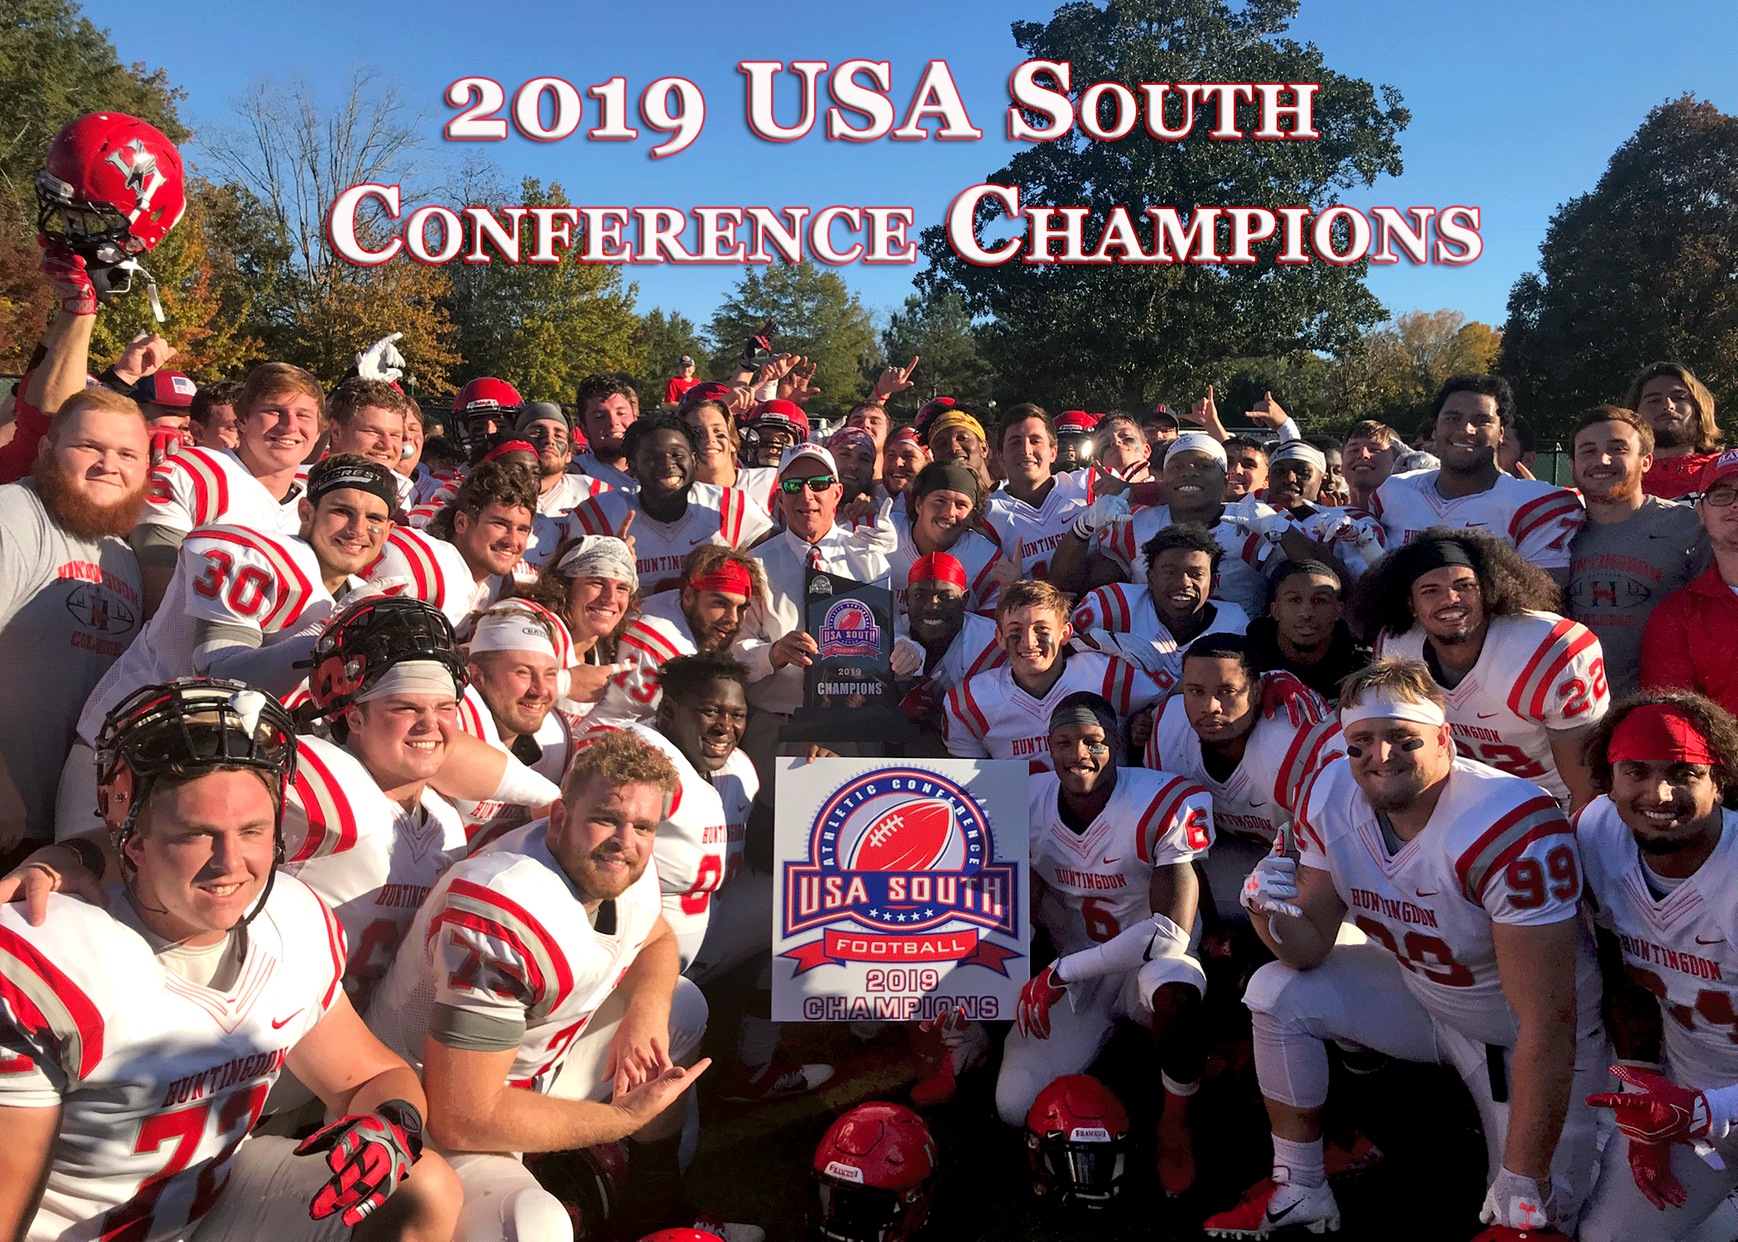 Hawks clinch fourth conference title in five years